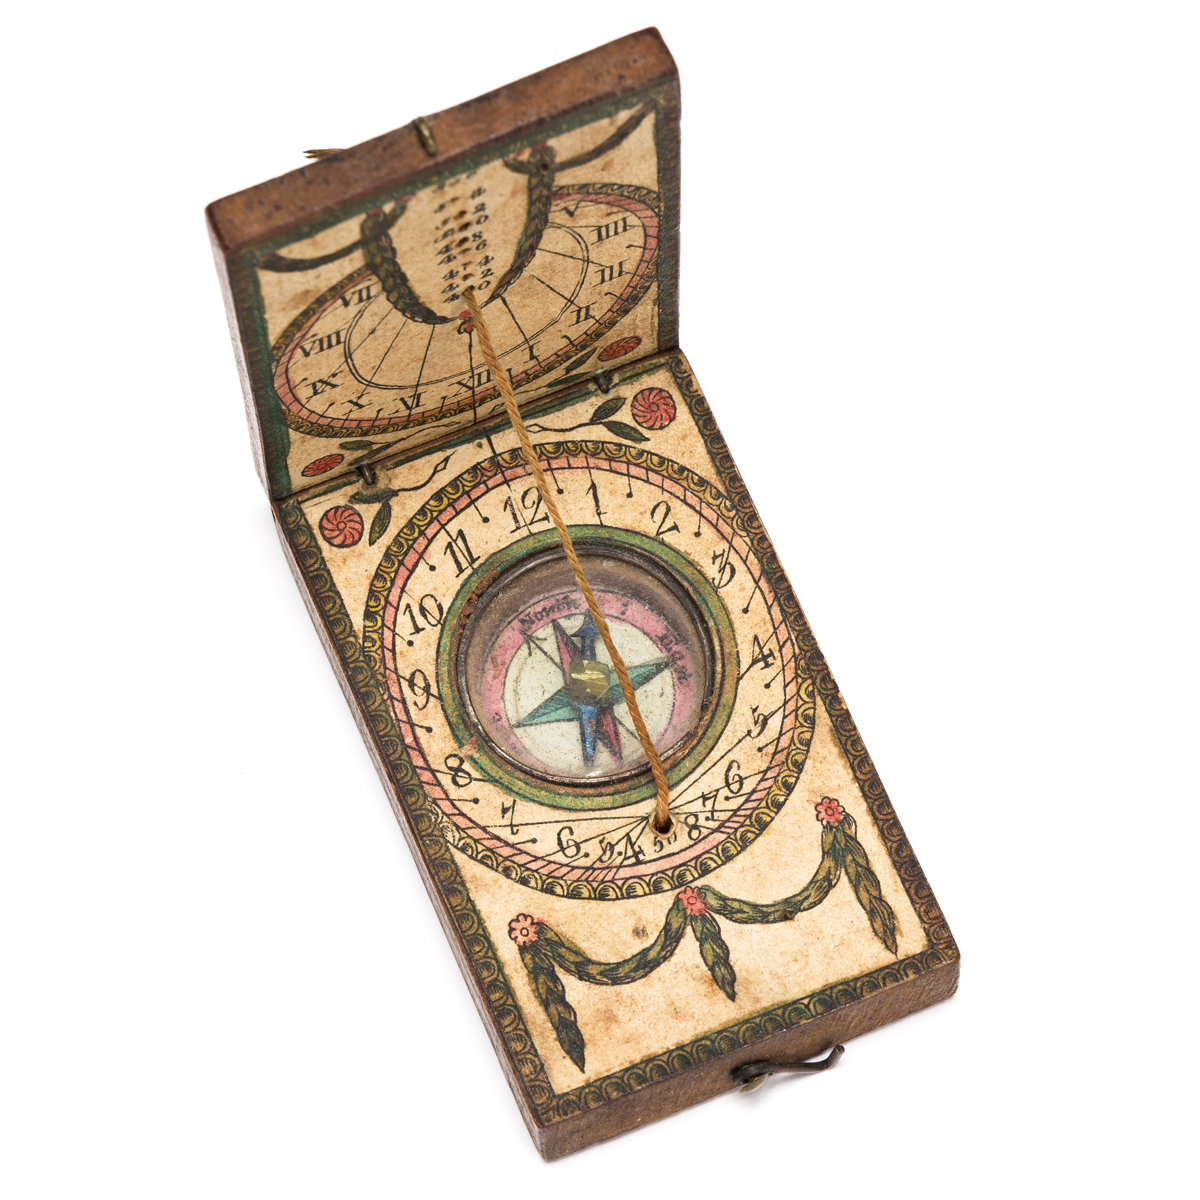 (INSTRUMENTS.) Early pocket compass and sundial diptych.